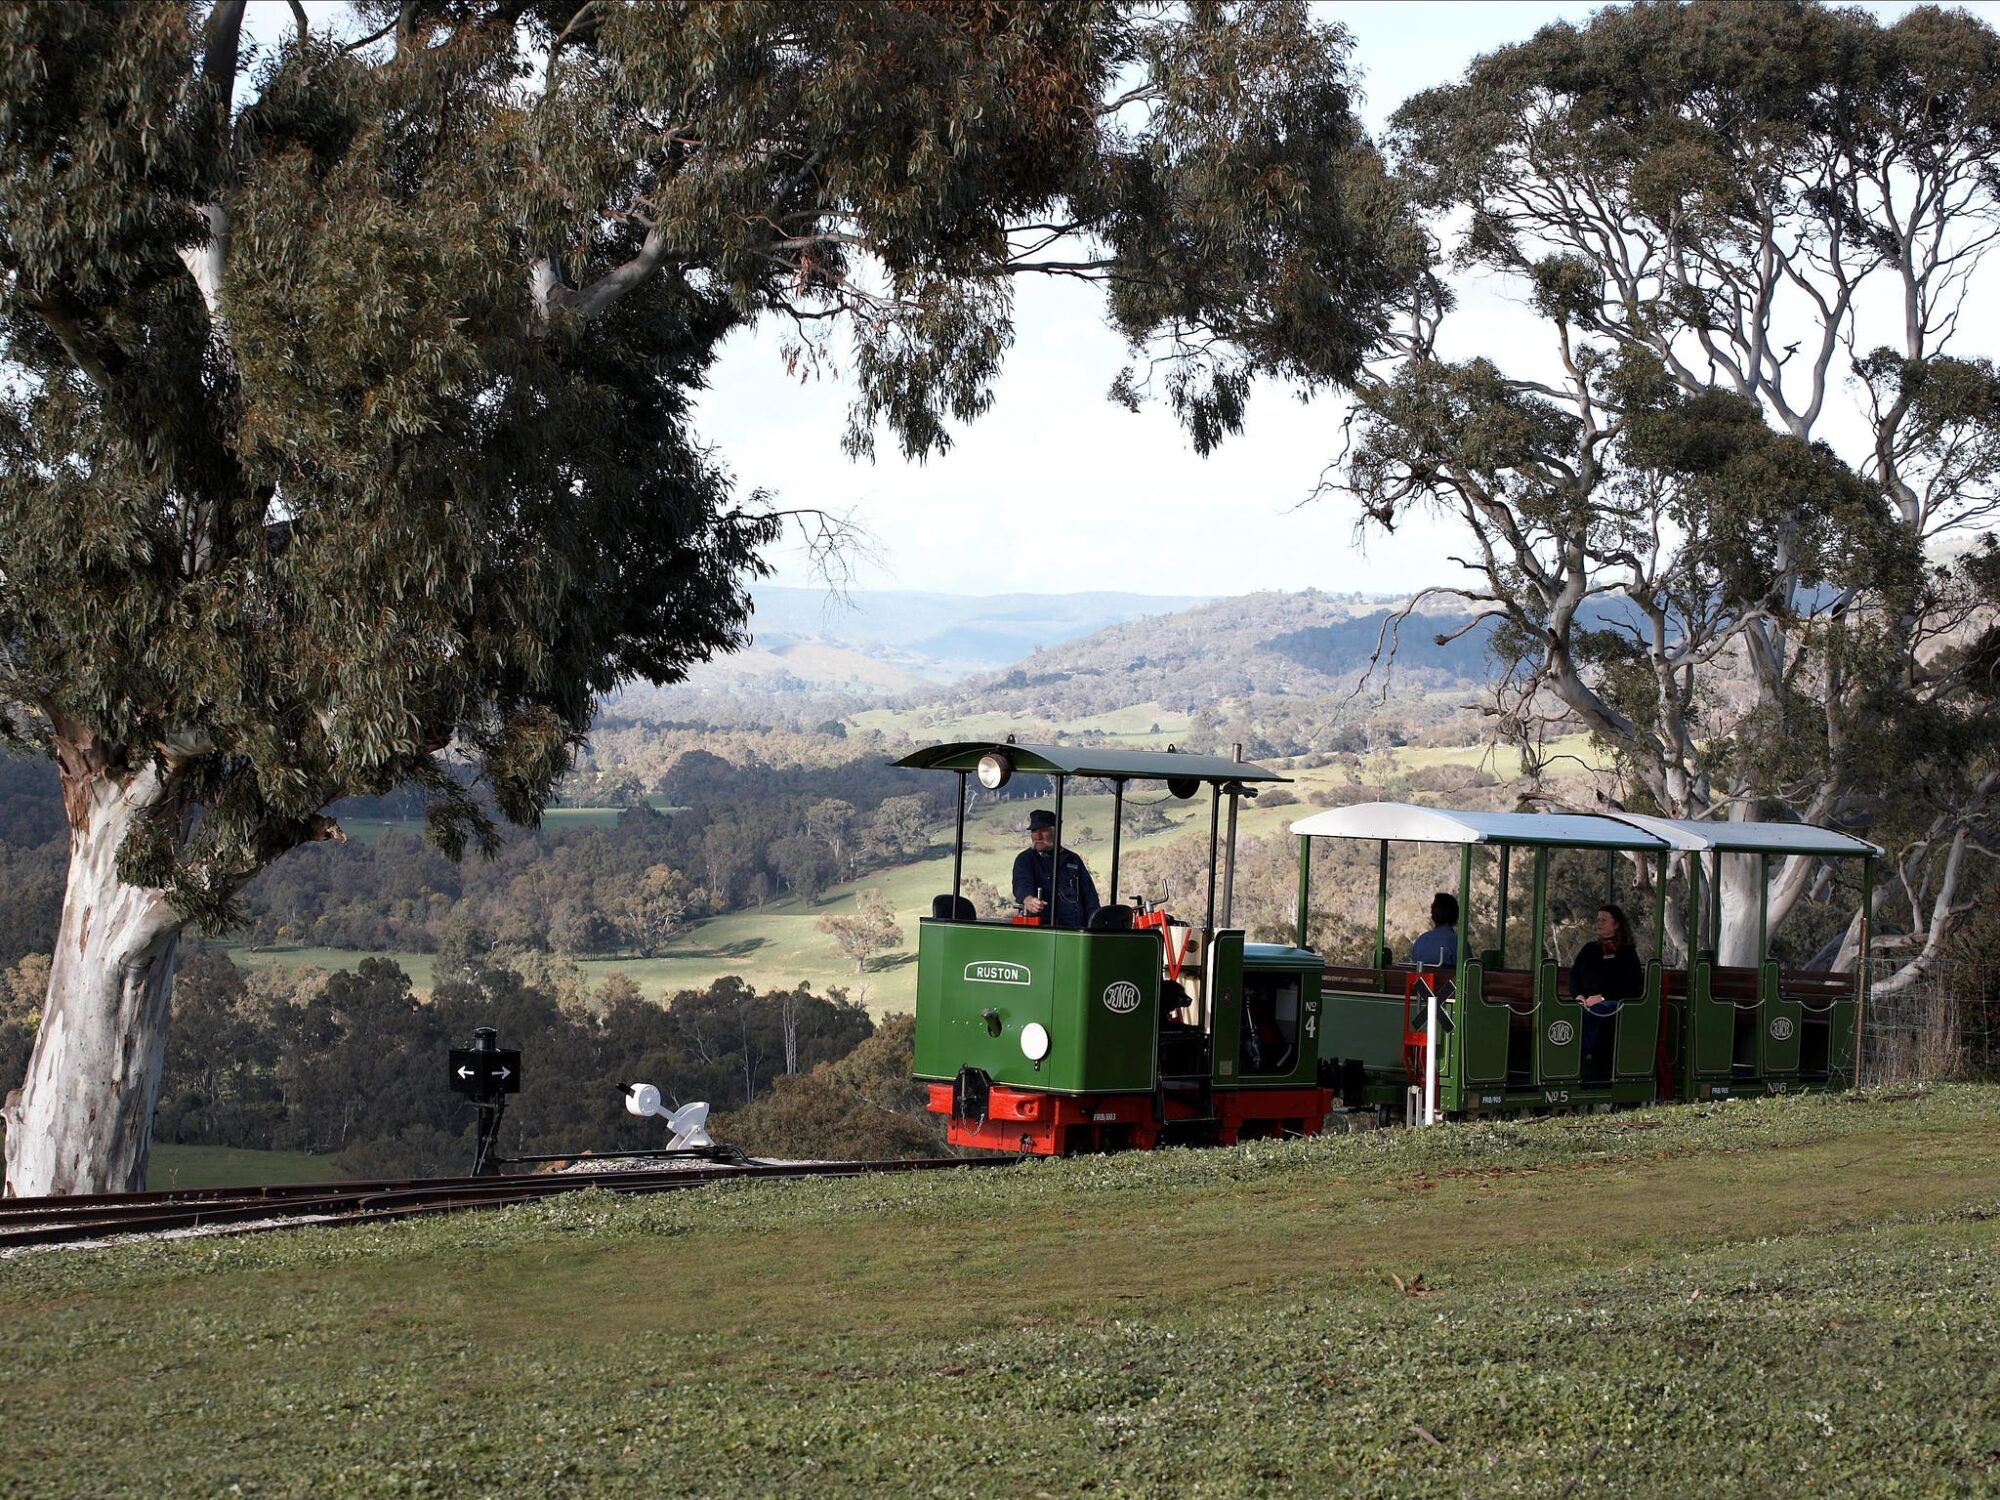 A photo of the Ruston Locomotive view a view toward Strath Creek South of 'Summit Station'